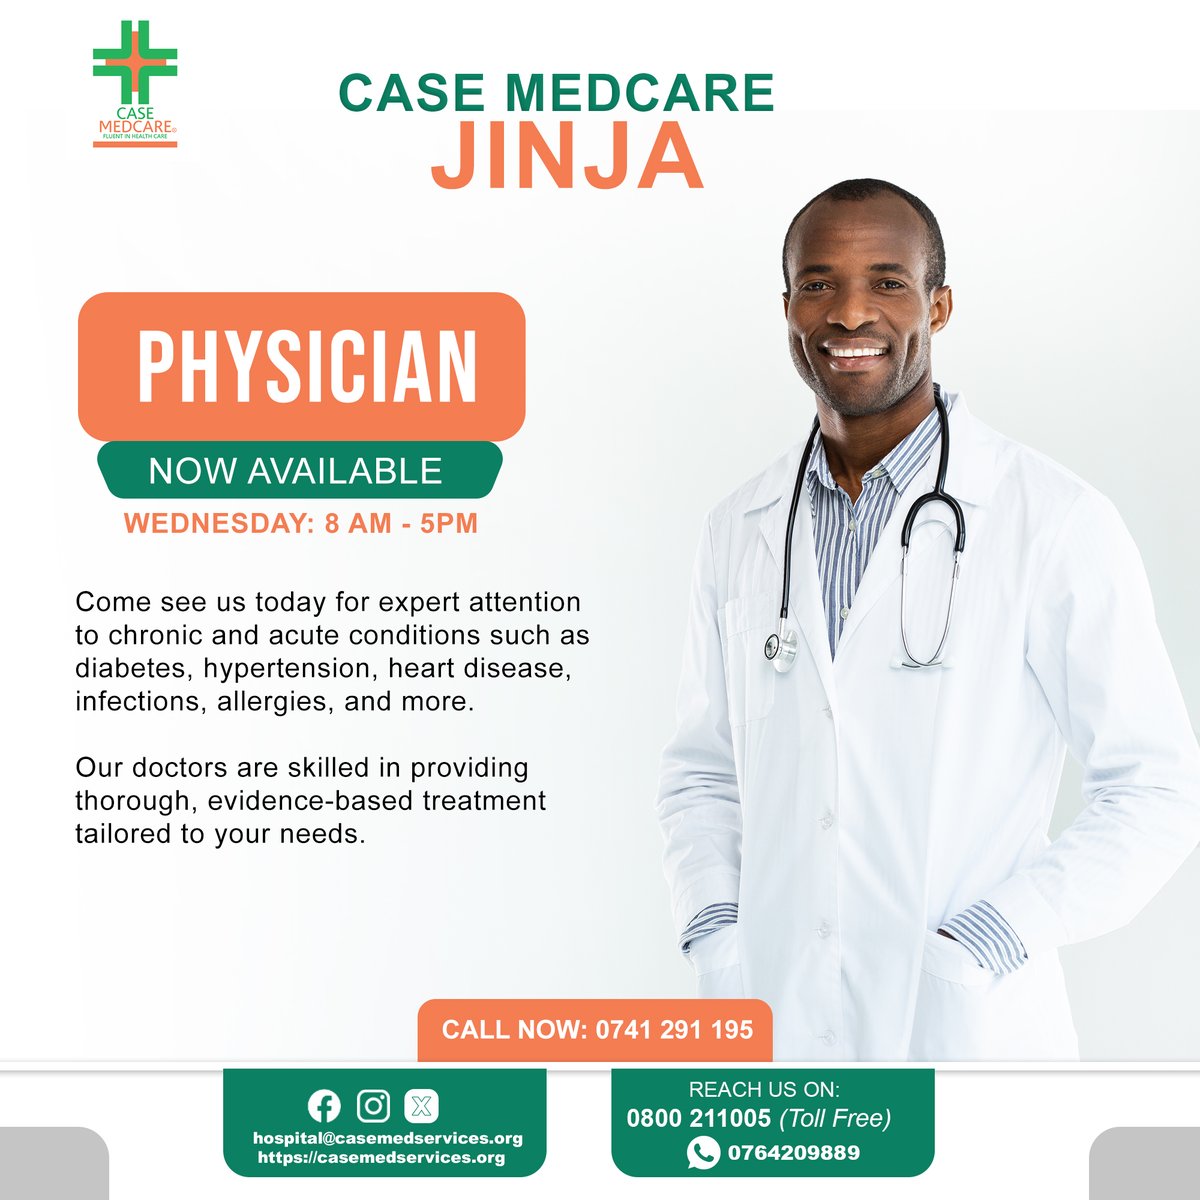 Greetings Jinja residents, We're pleased to inform you that the Physician will be available tomorrow at Case Medcare Jinja from 8:00 am to 5:00 pm. Don't miss the opportunity to visit us or schedule an appointment by calling 0741 291 195. #FluentinHealthcare #Jinja